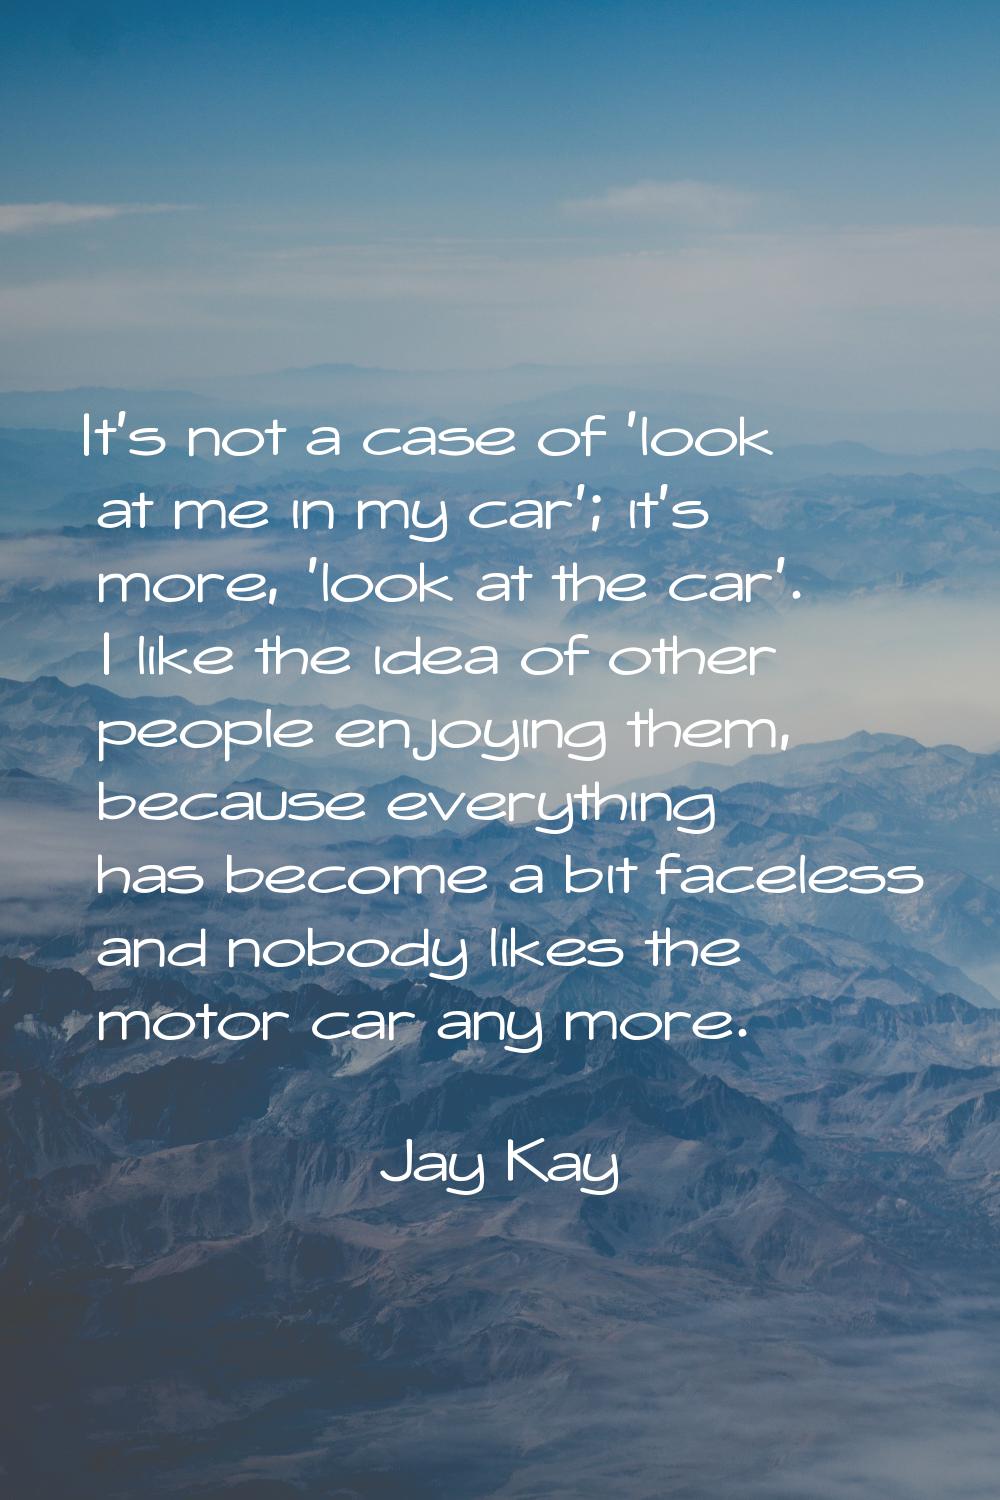 It's not a case of 'look at me in my car'; it's more, 'look at the car'. I like the idea of other p